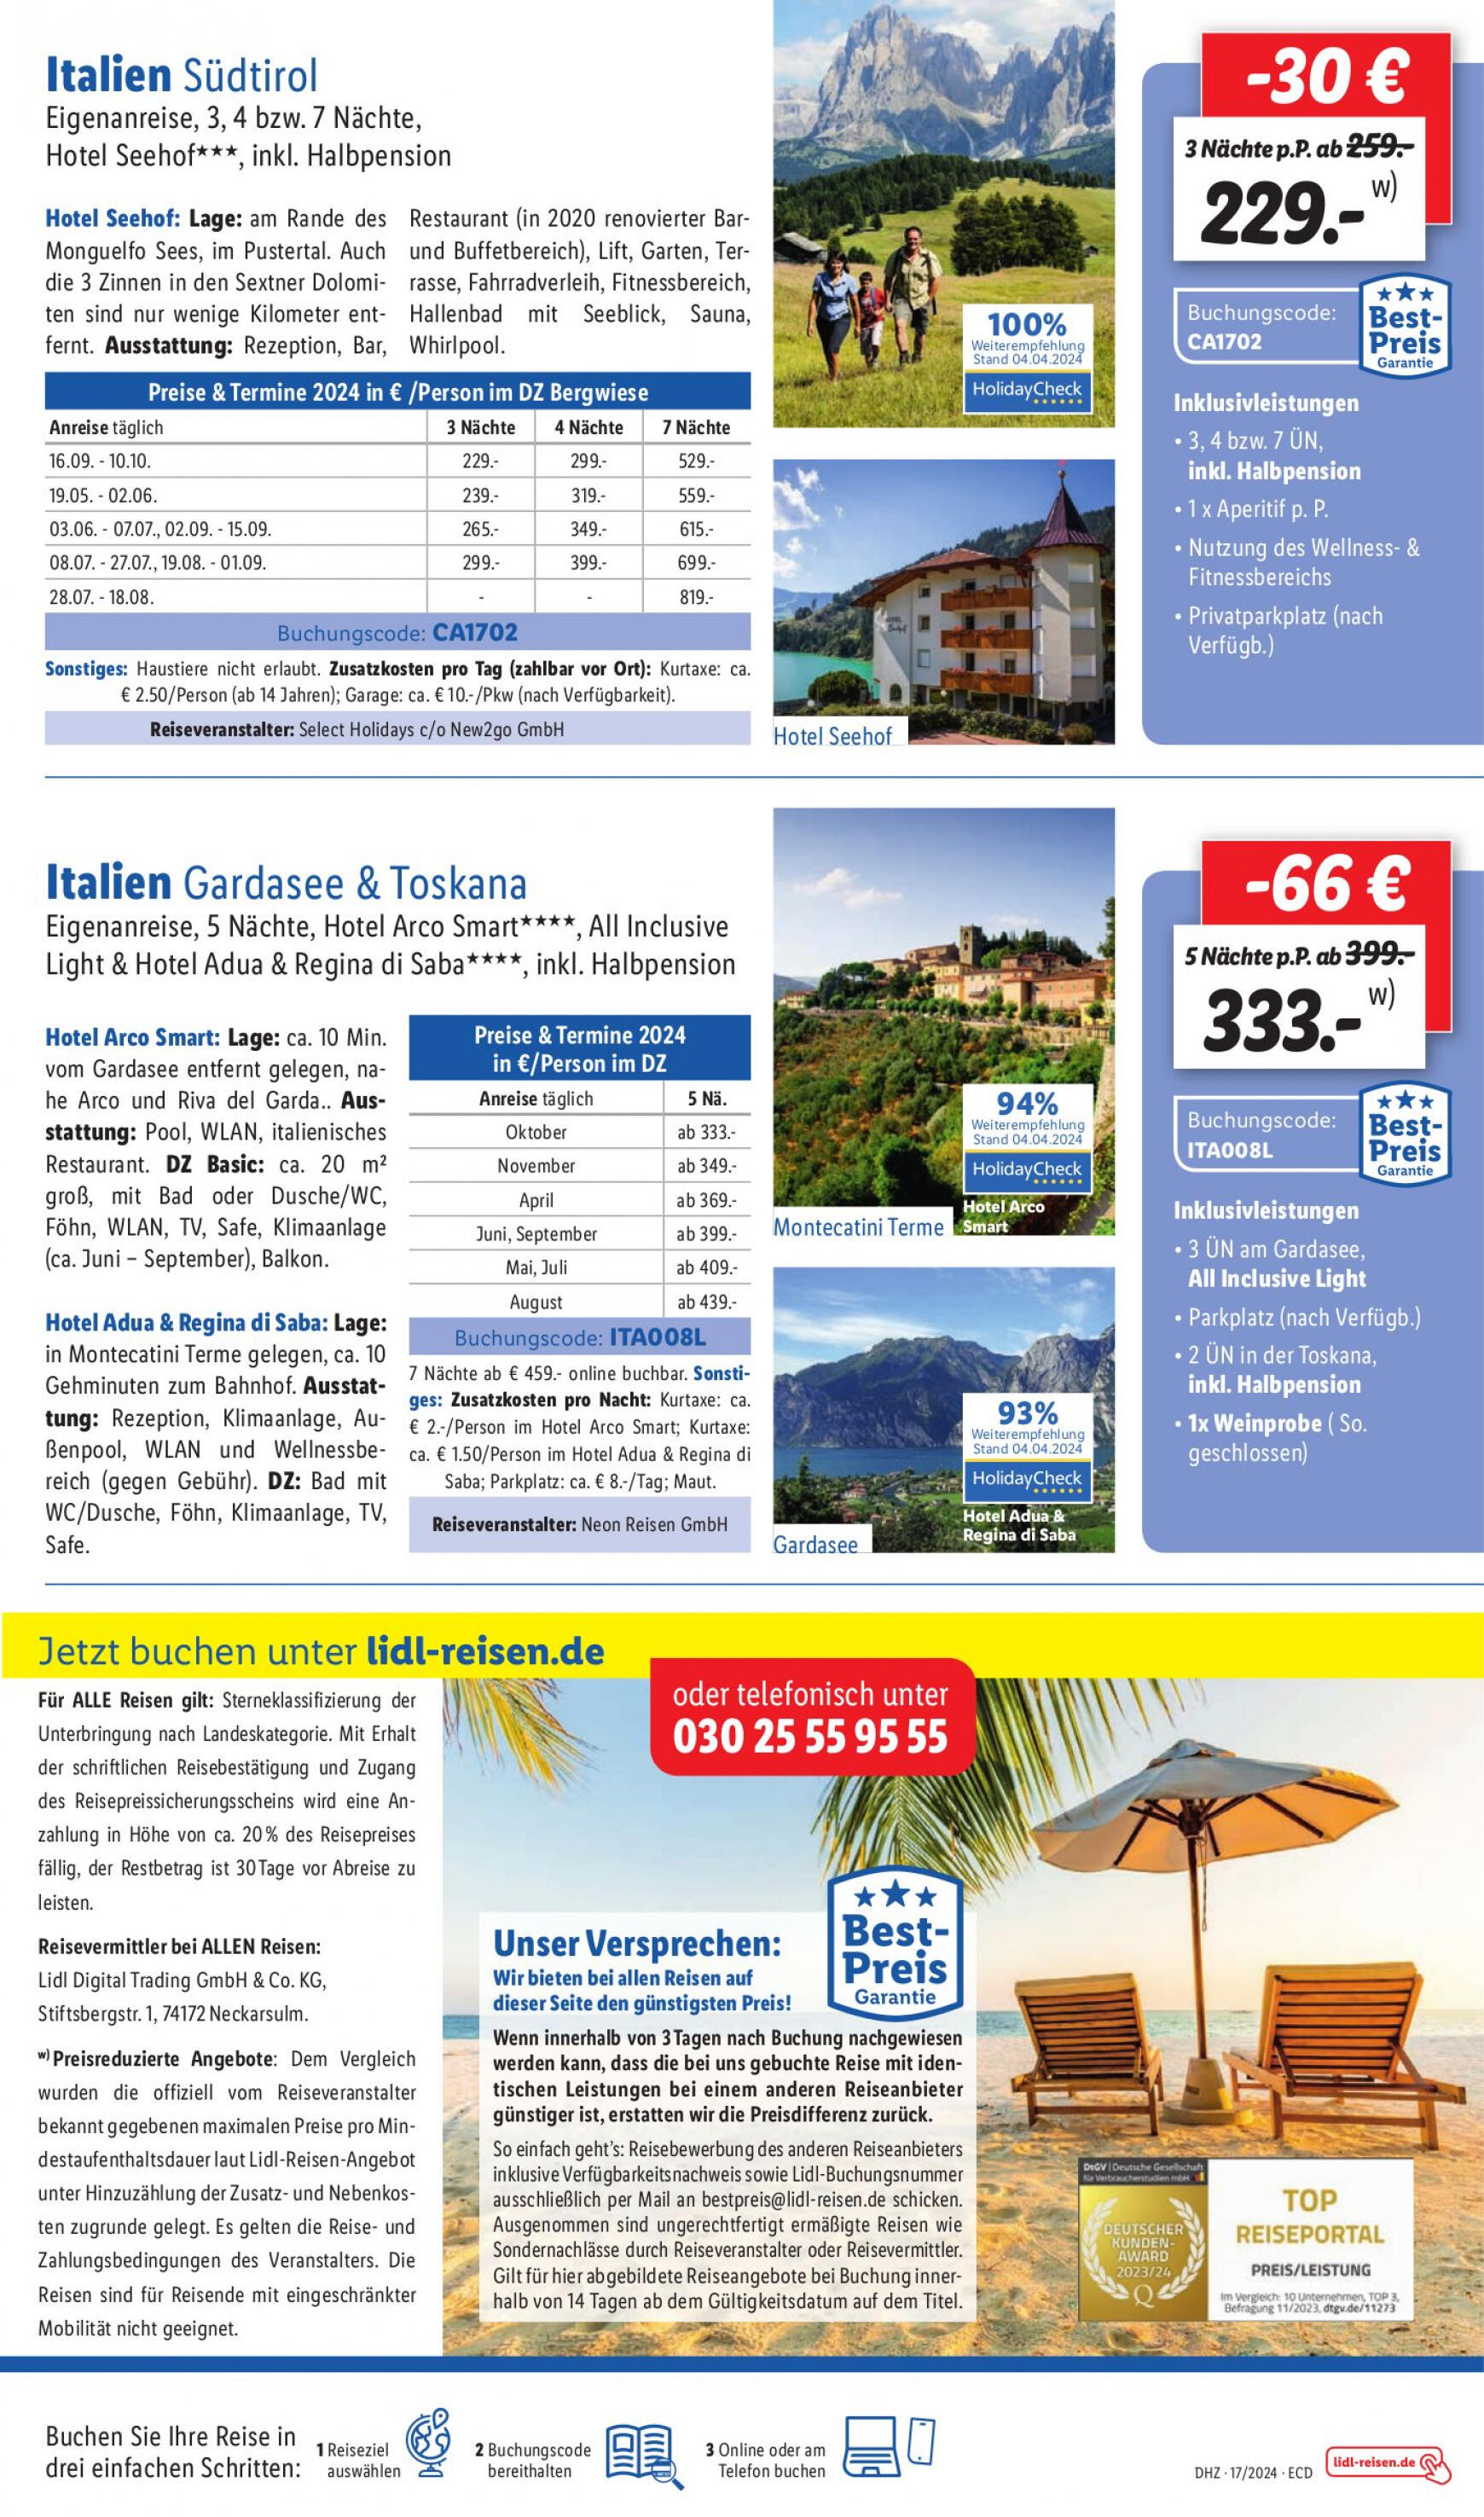 lidl - Flyer Lidl aktuell 22.04. - 27.04. - page: 57